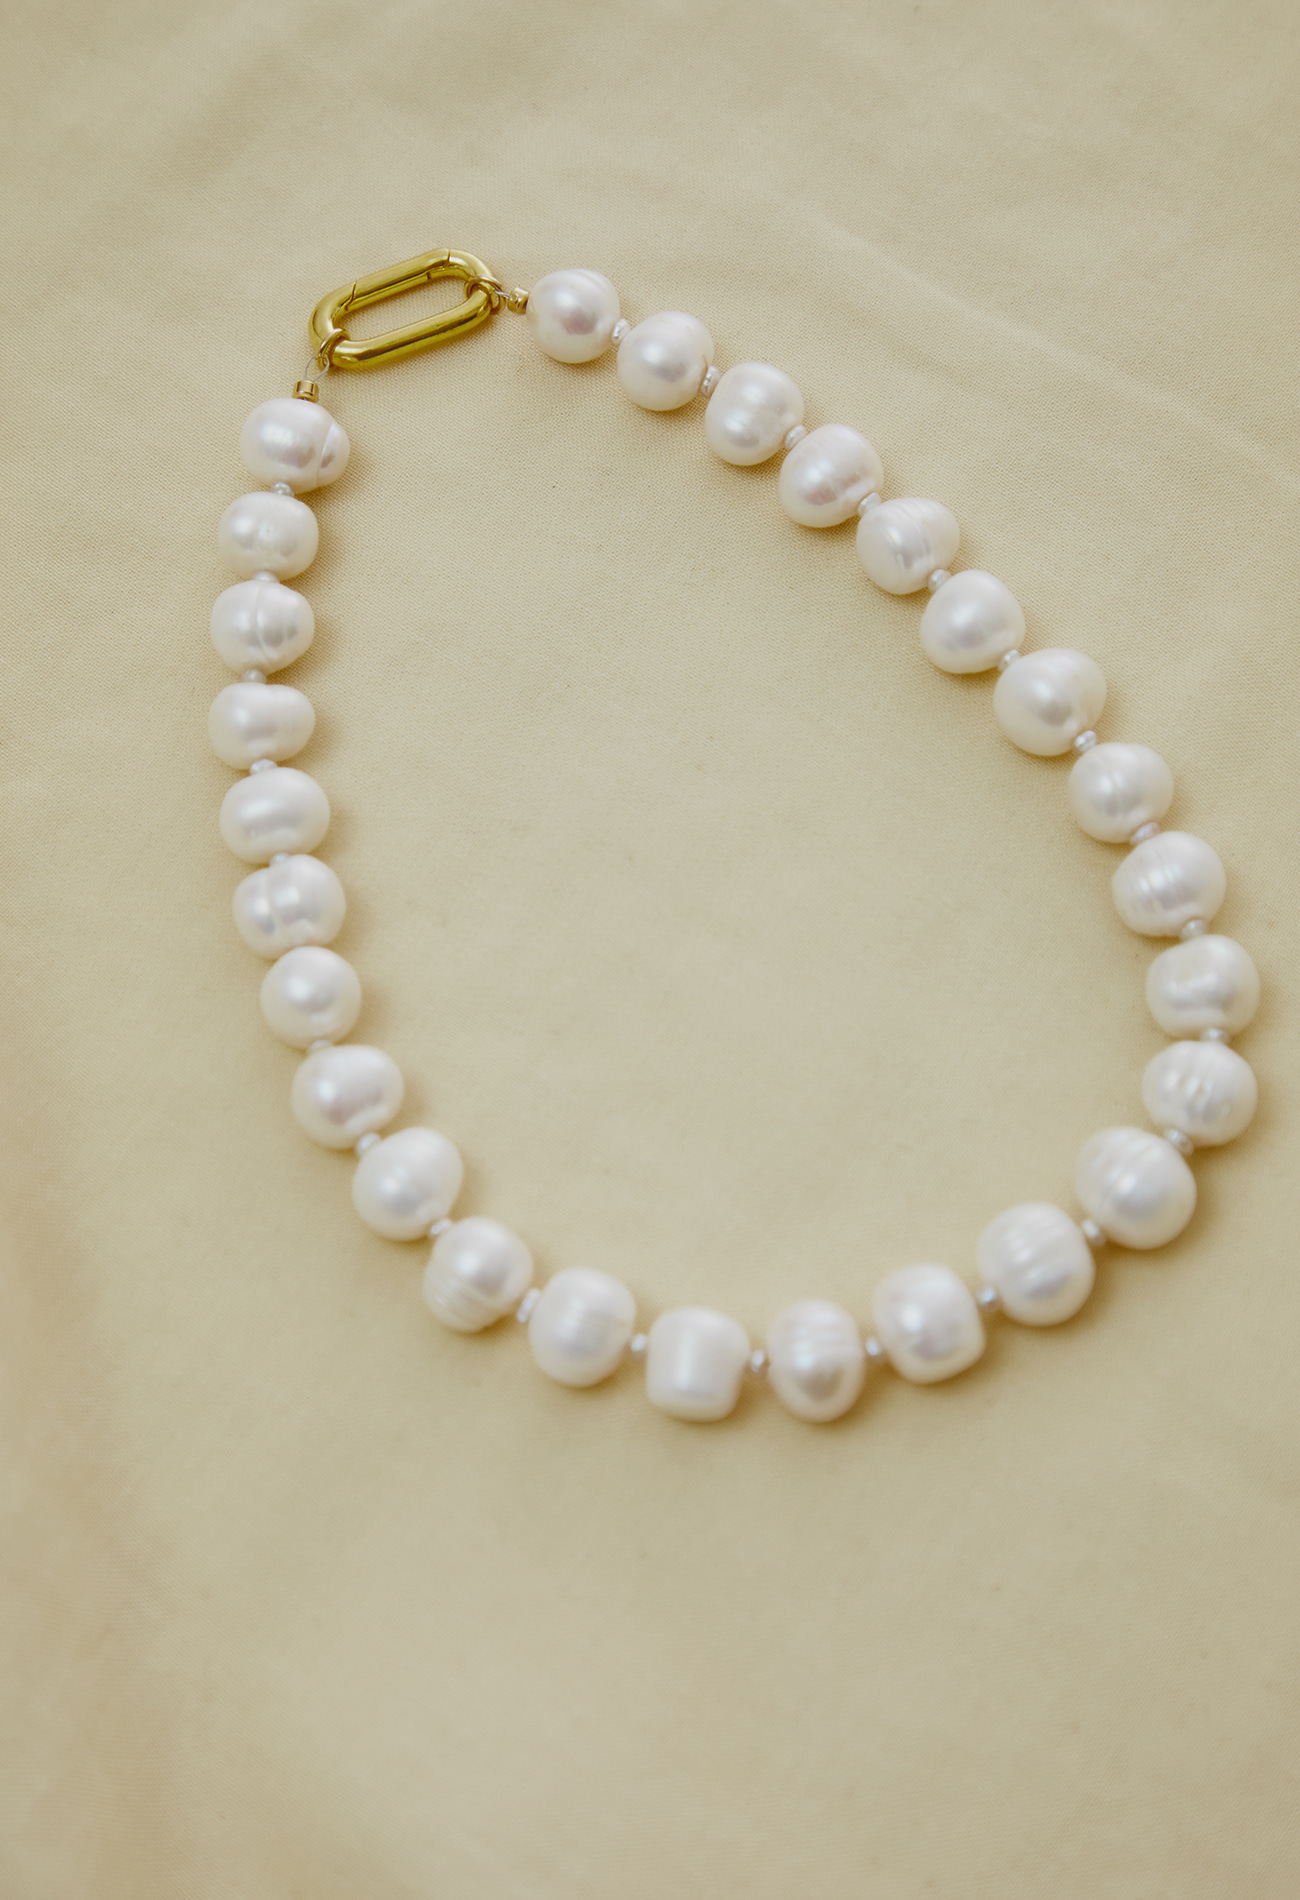 Basic pearl necklace